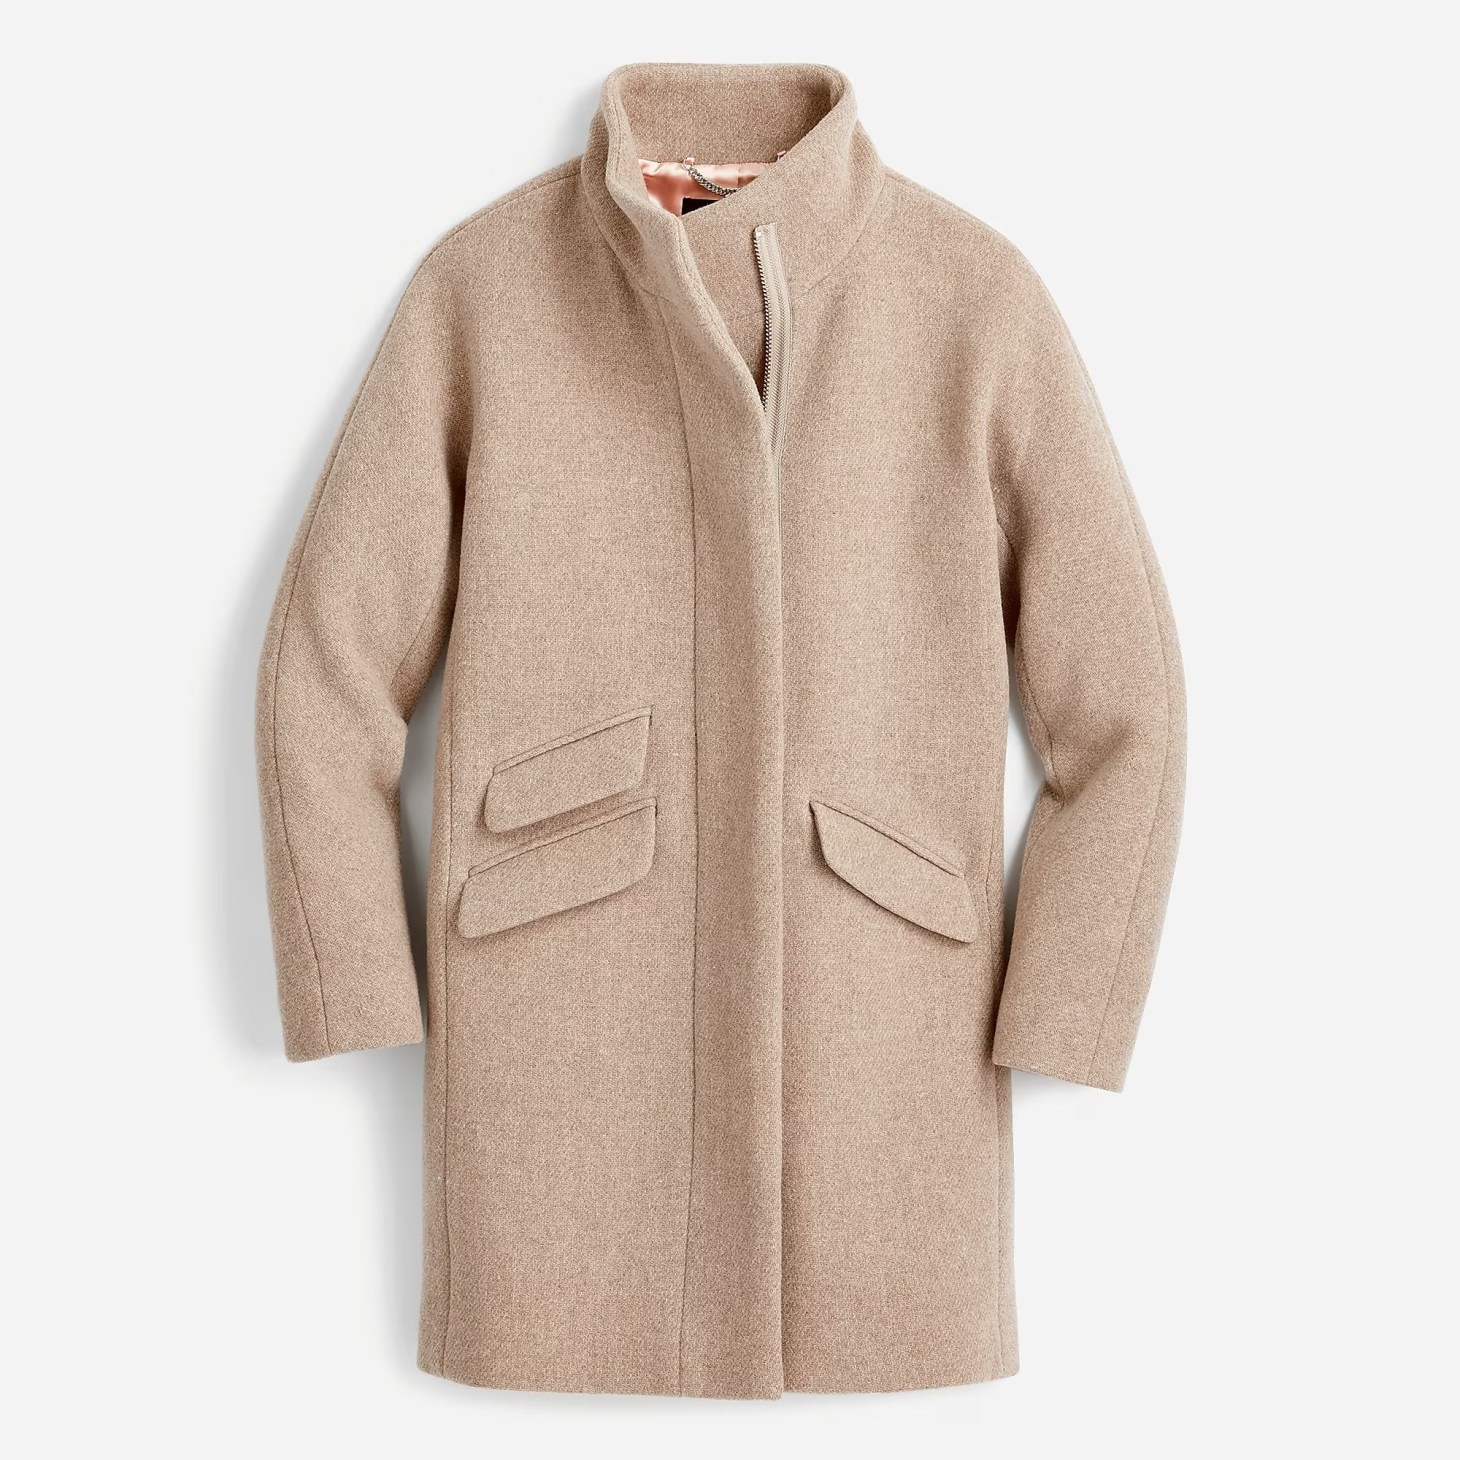 j.crew cocoon wool coat for extreme cold